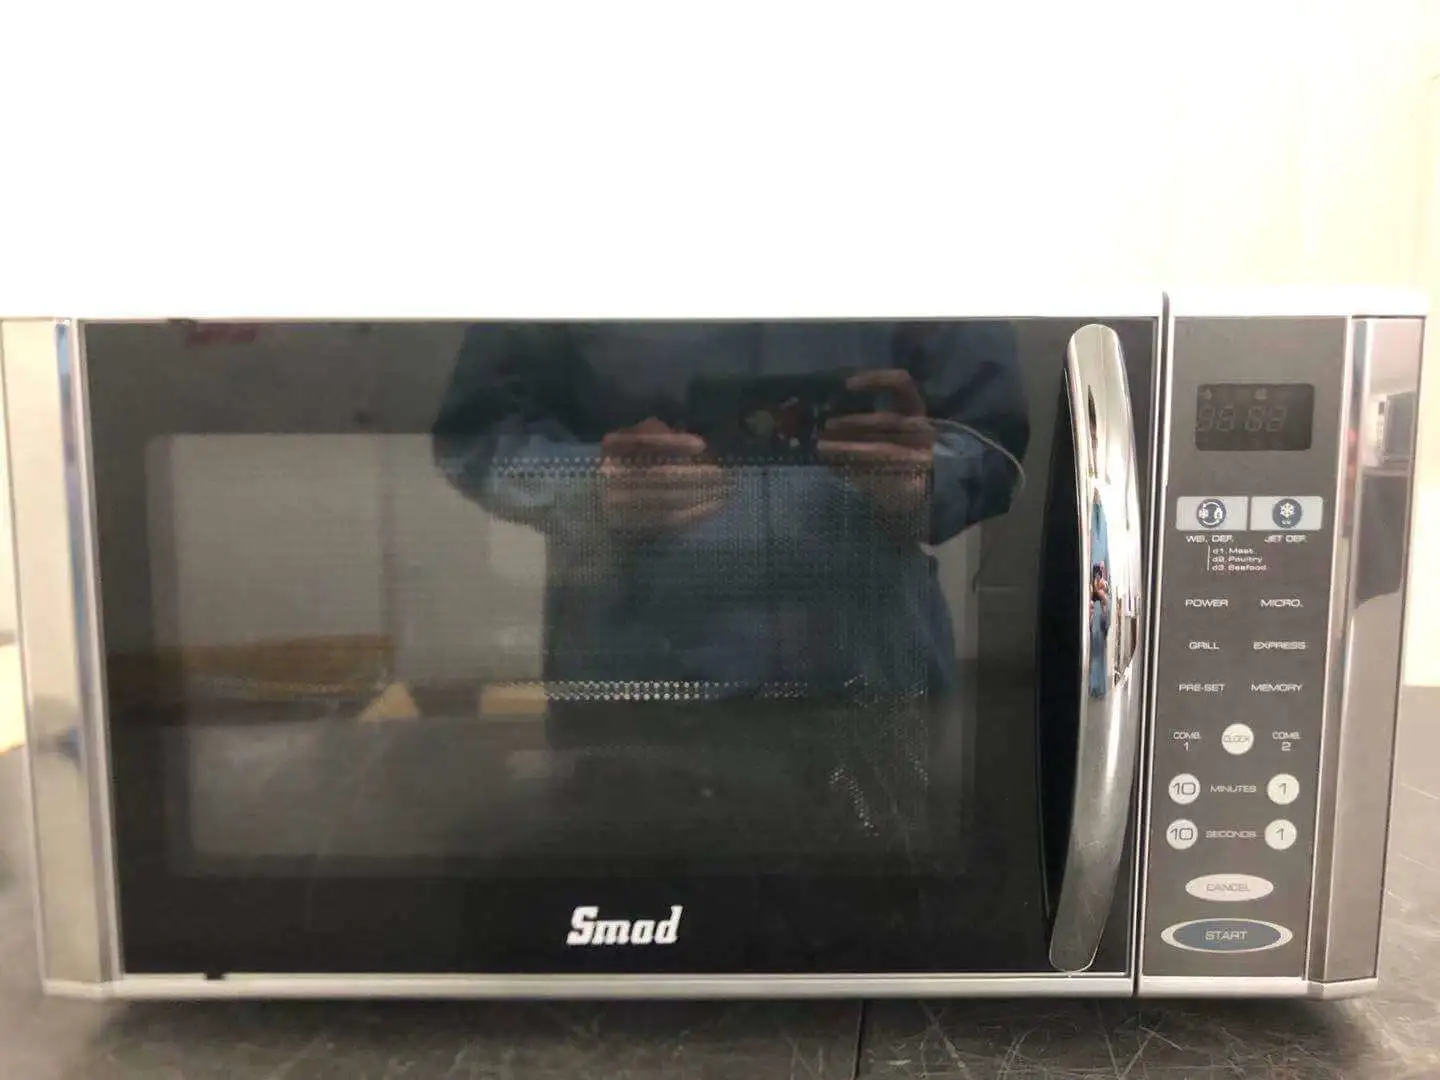 Smad 28L Small Microwave